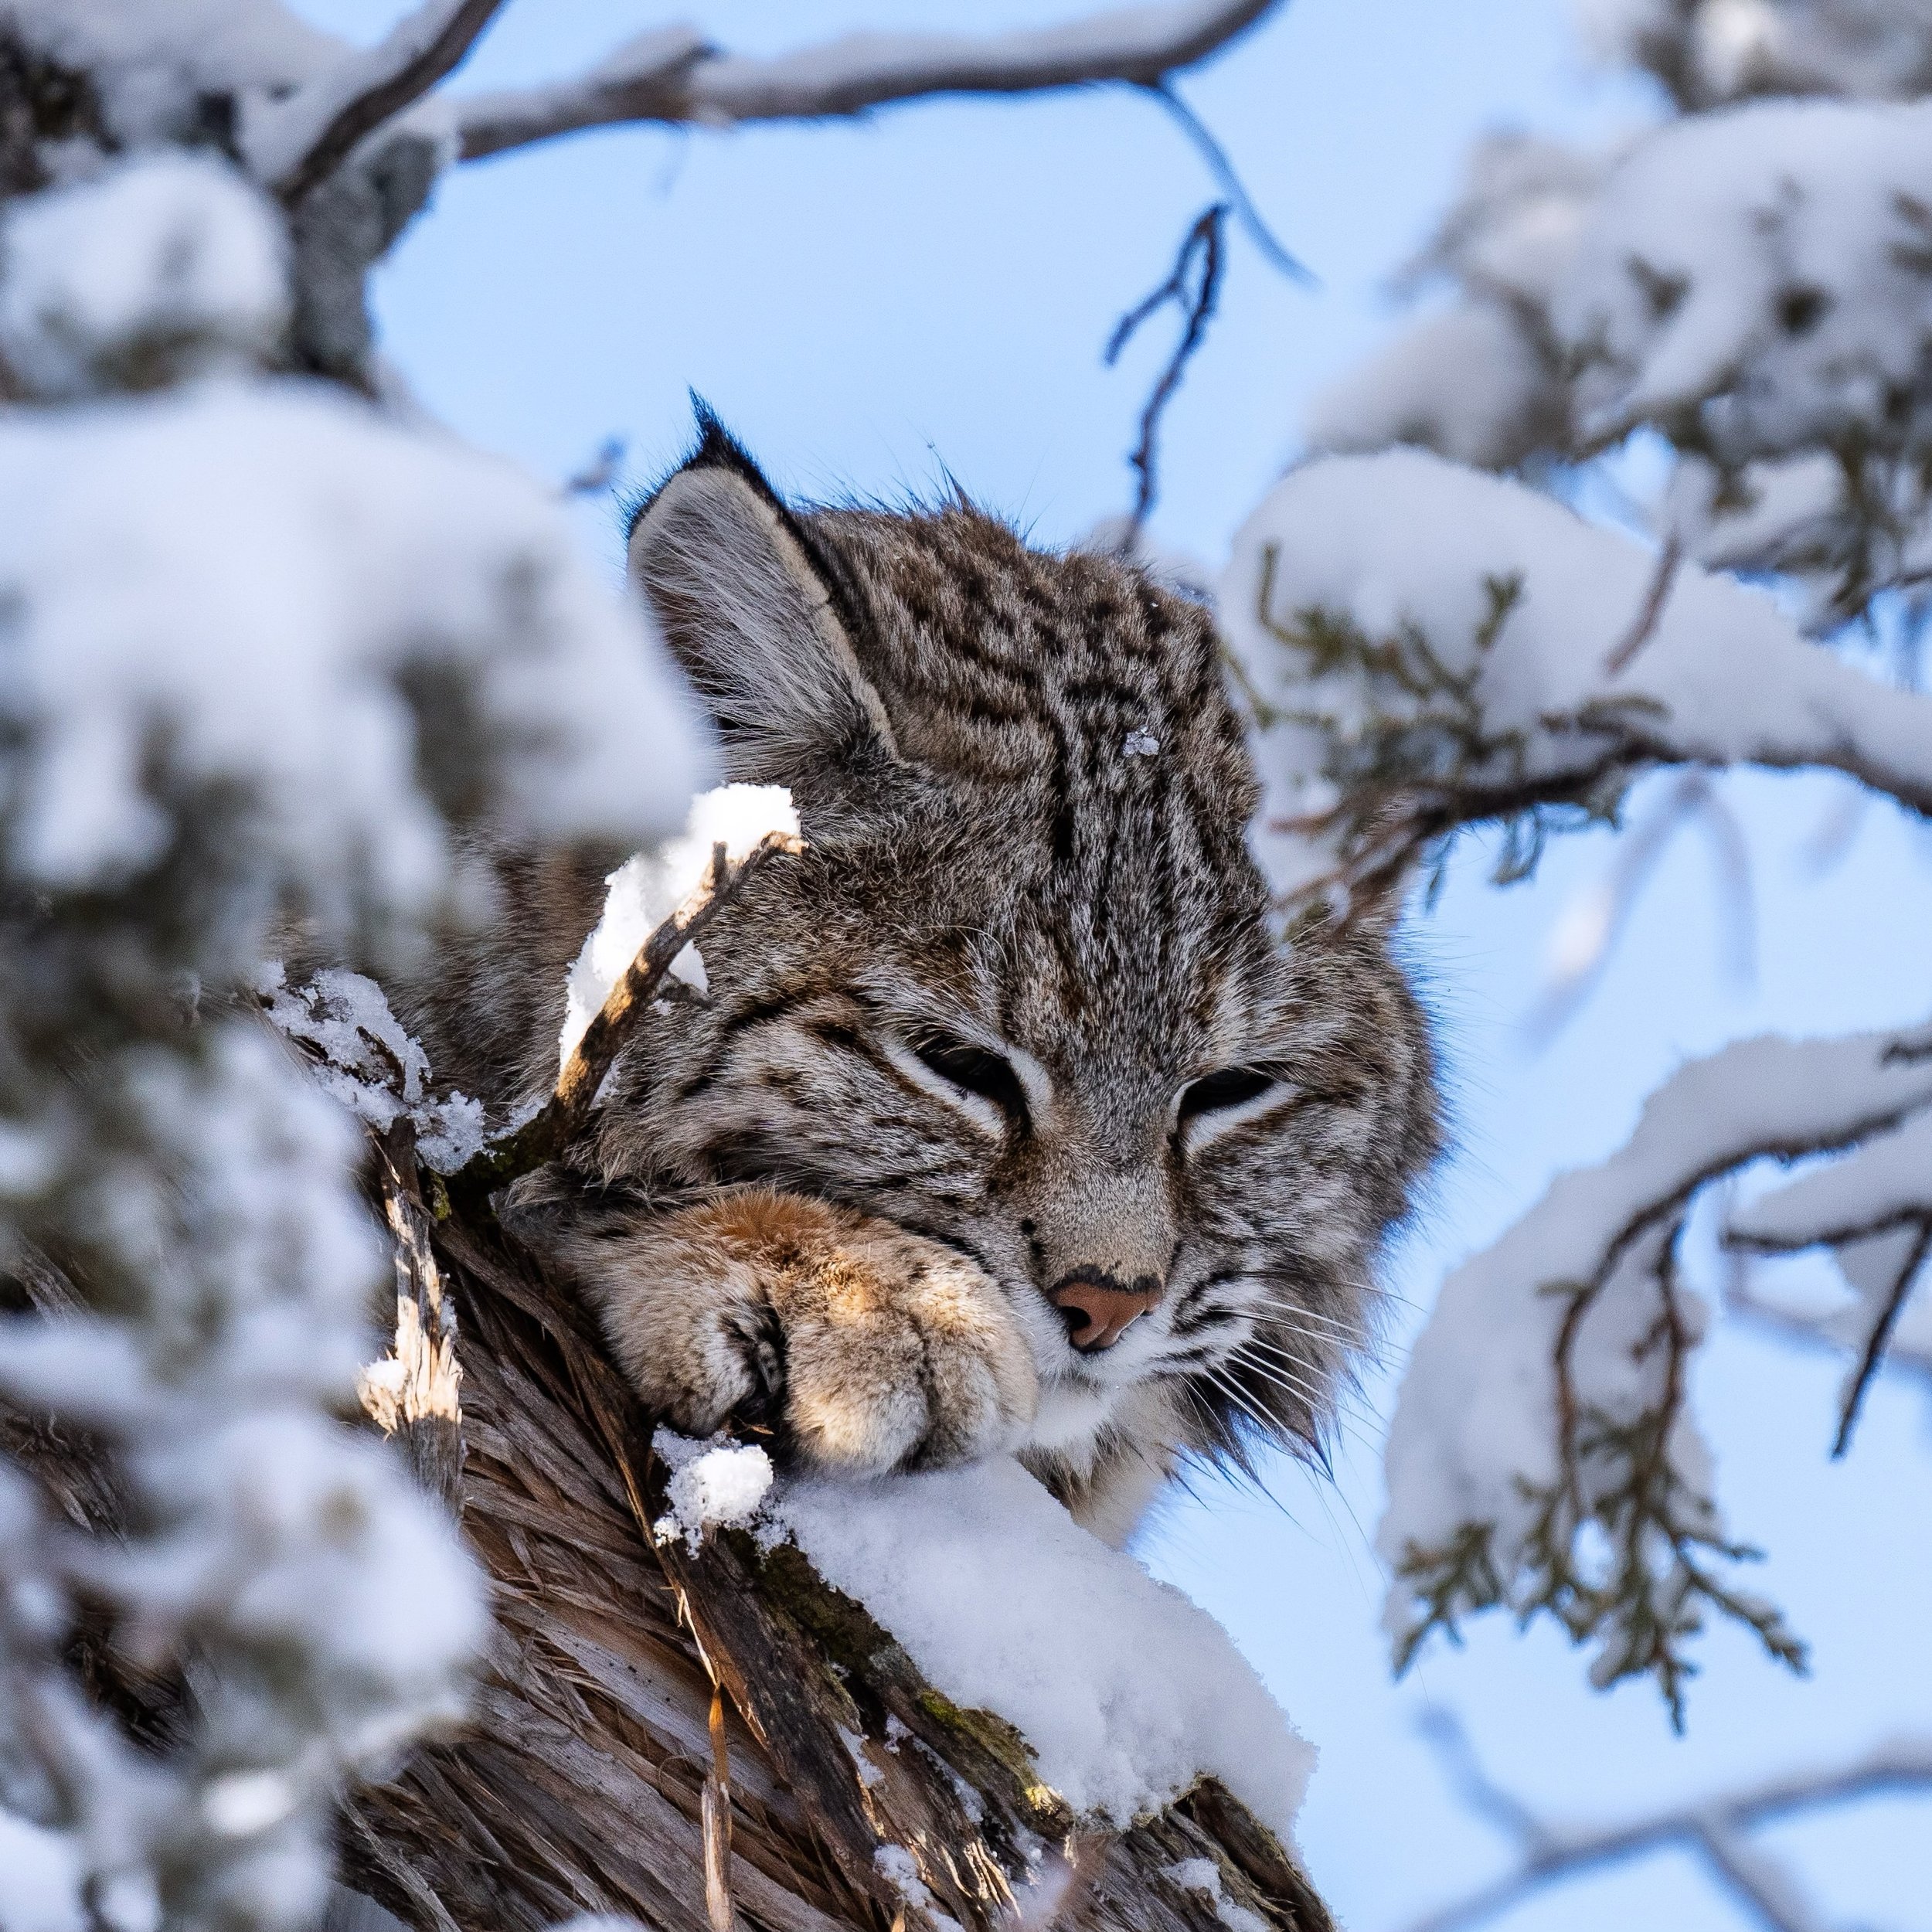 🎵What do bobcats dream of🎵
🎵When they take a little bobcat snooze🎵